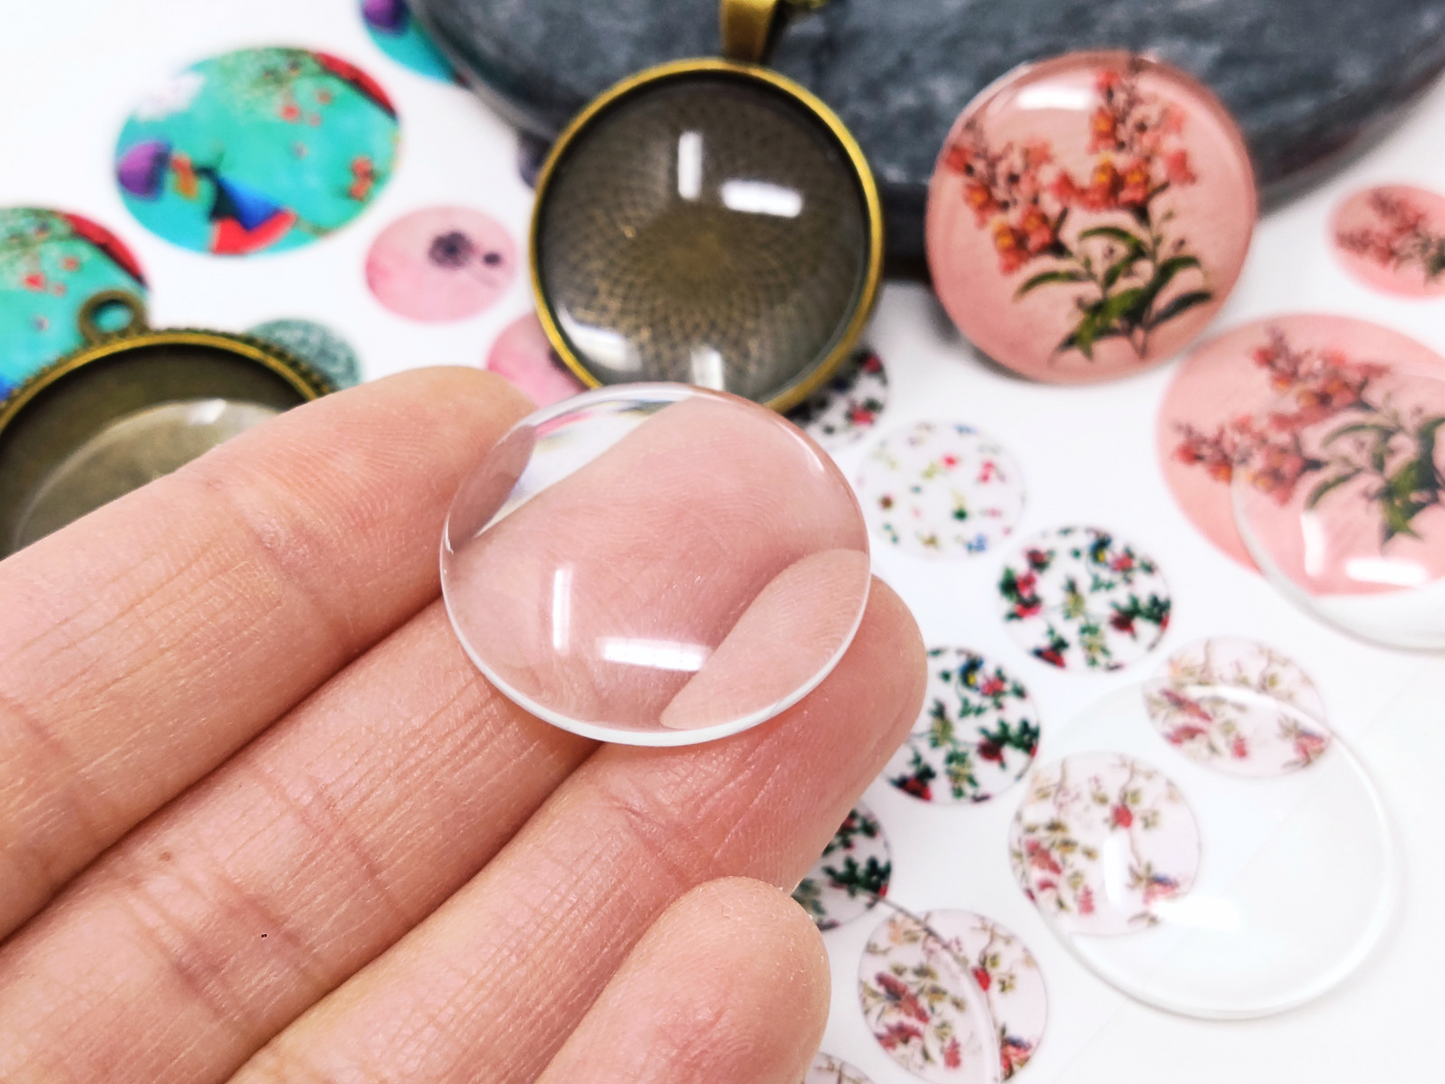 20 pcs 25mm Round Flat Back Clear Glass Cabochon Transparent Cabochon For DIY Jewelry